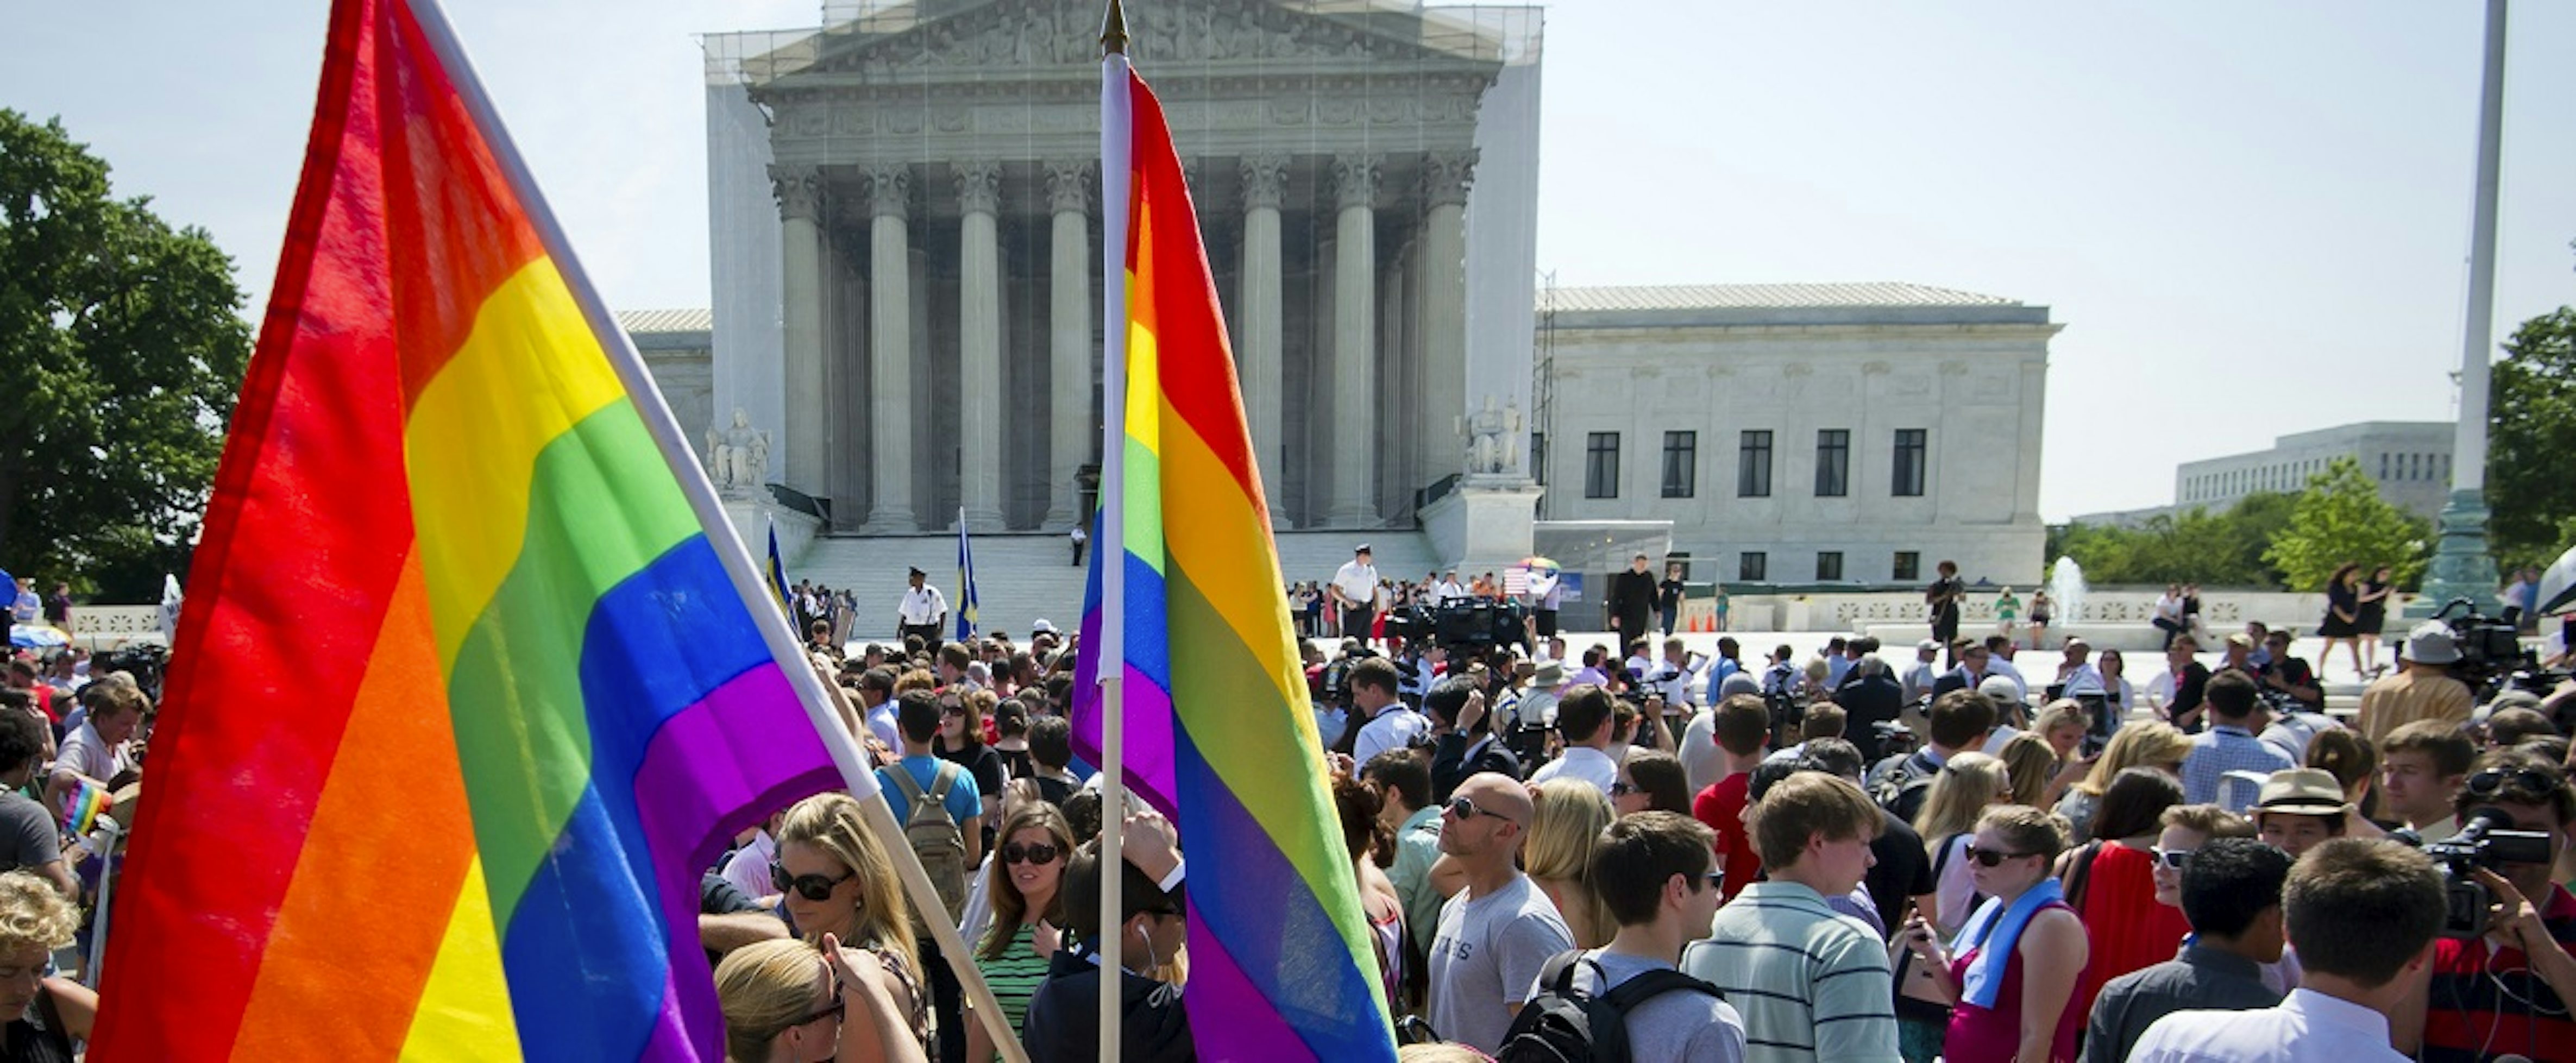 Supreme Court Lower Court Same Sex Marriage Rulings Stand The New Republic